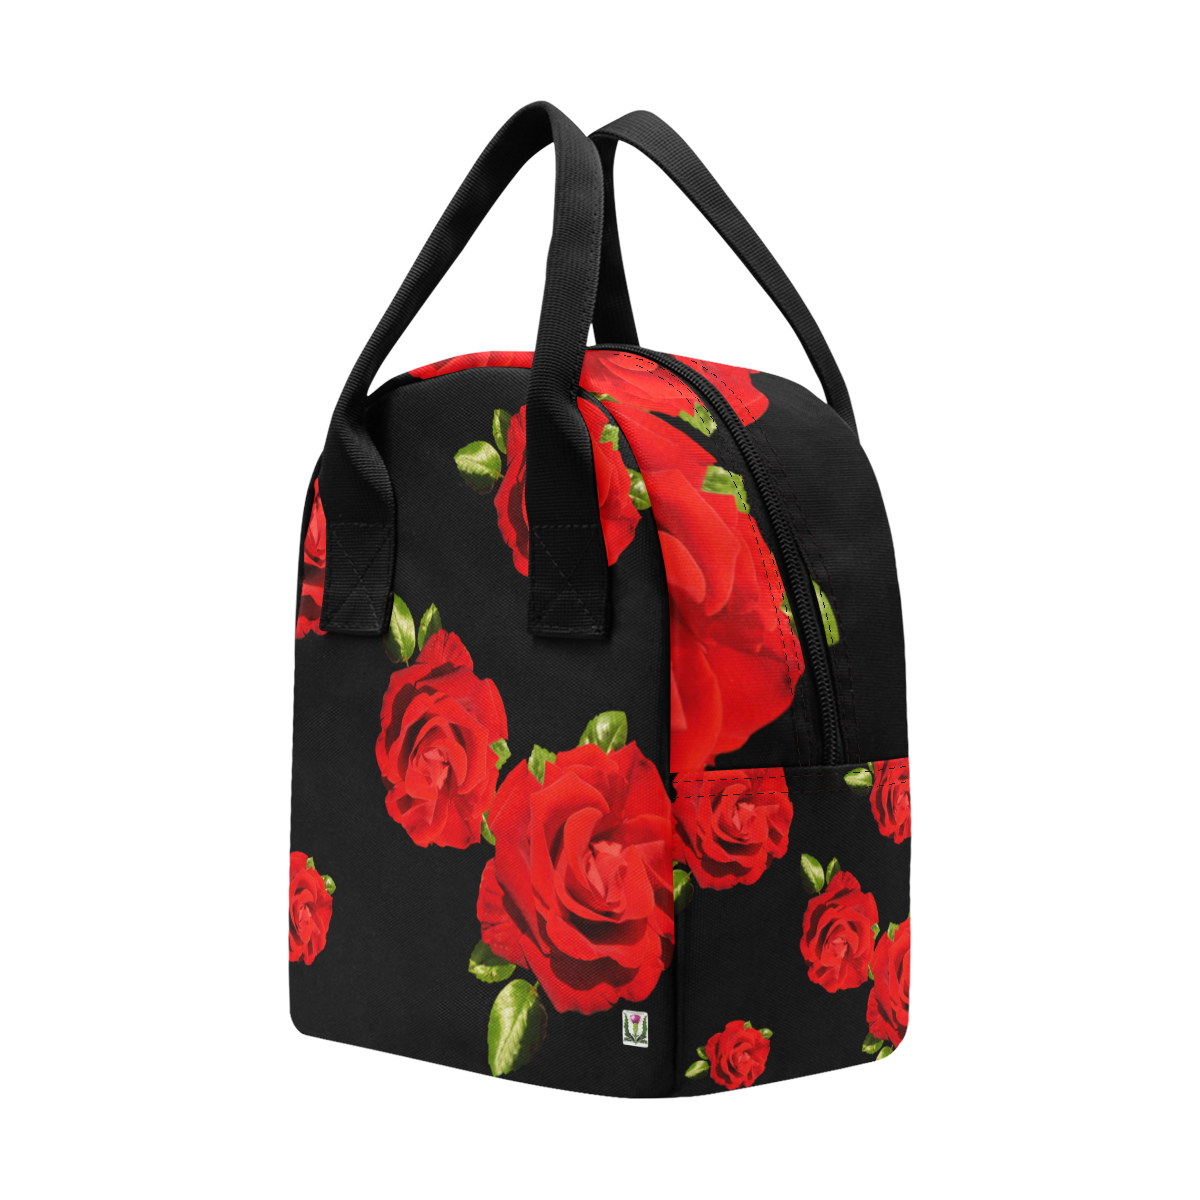 Fairlings Delight's Black Luxury Collection- Red Rose Zipper Lunch Bag 53086 Zipper Lunch Bag (Model 1689)